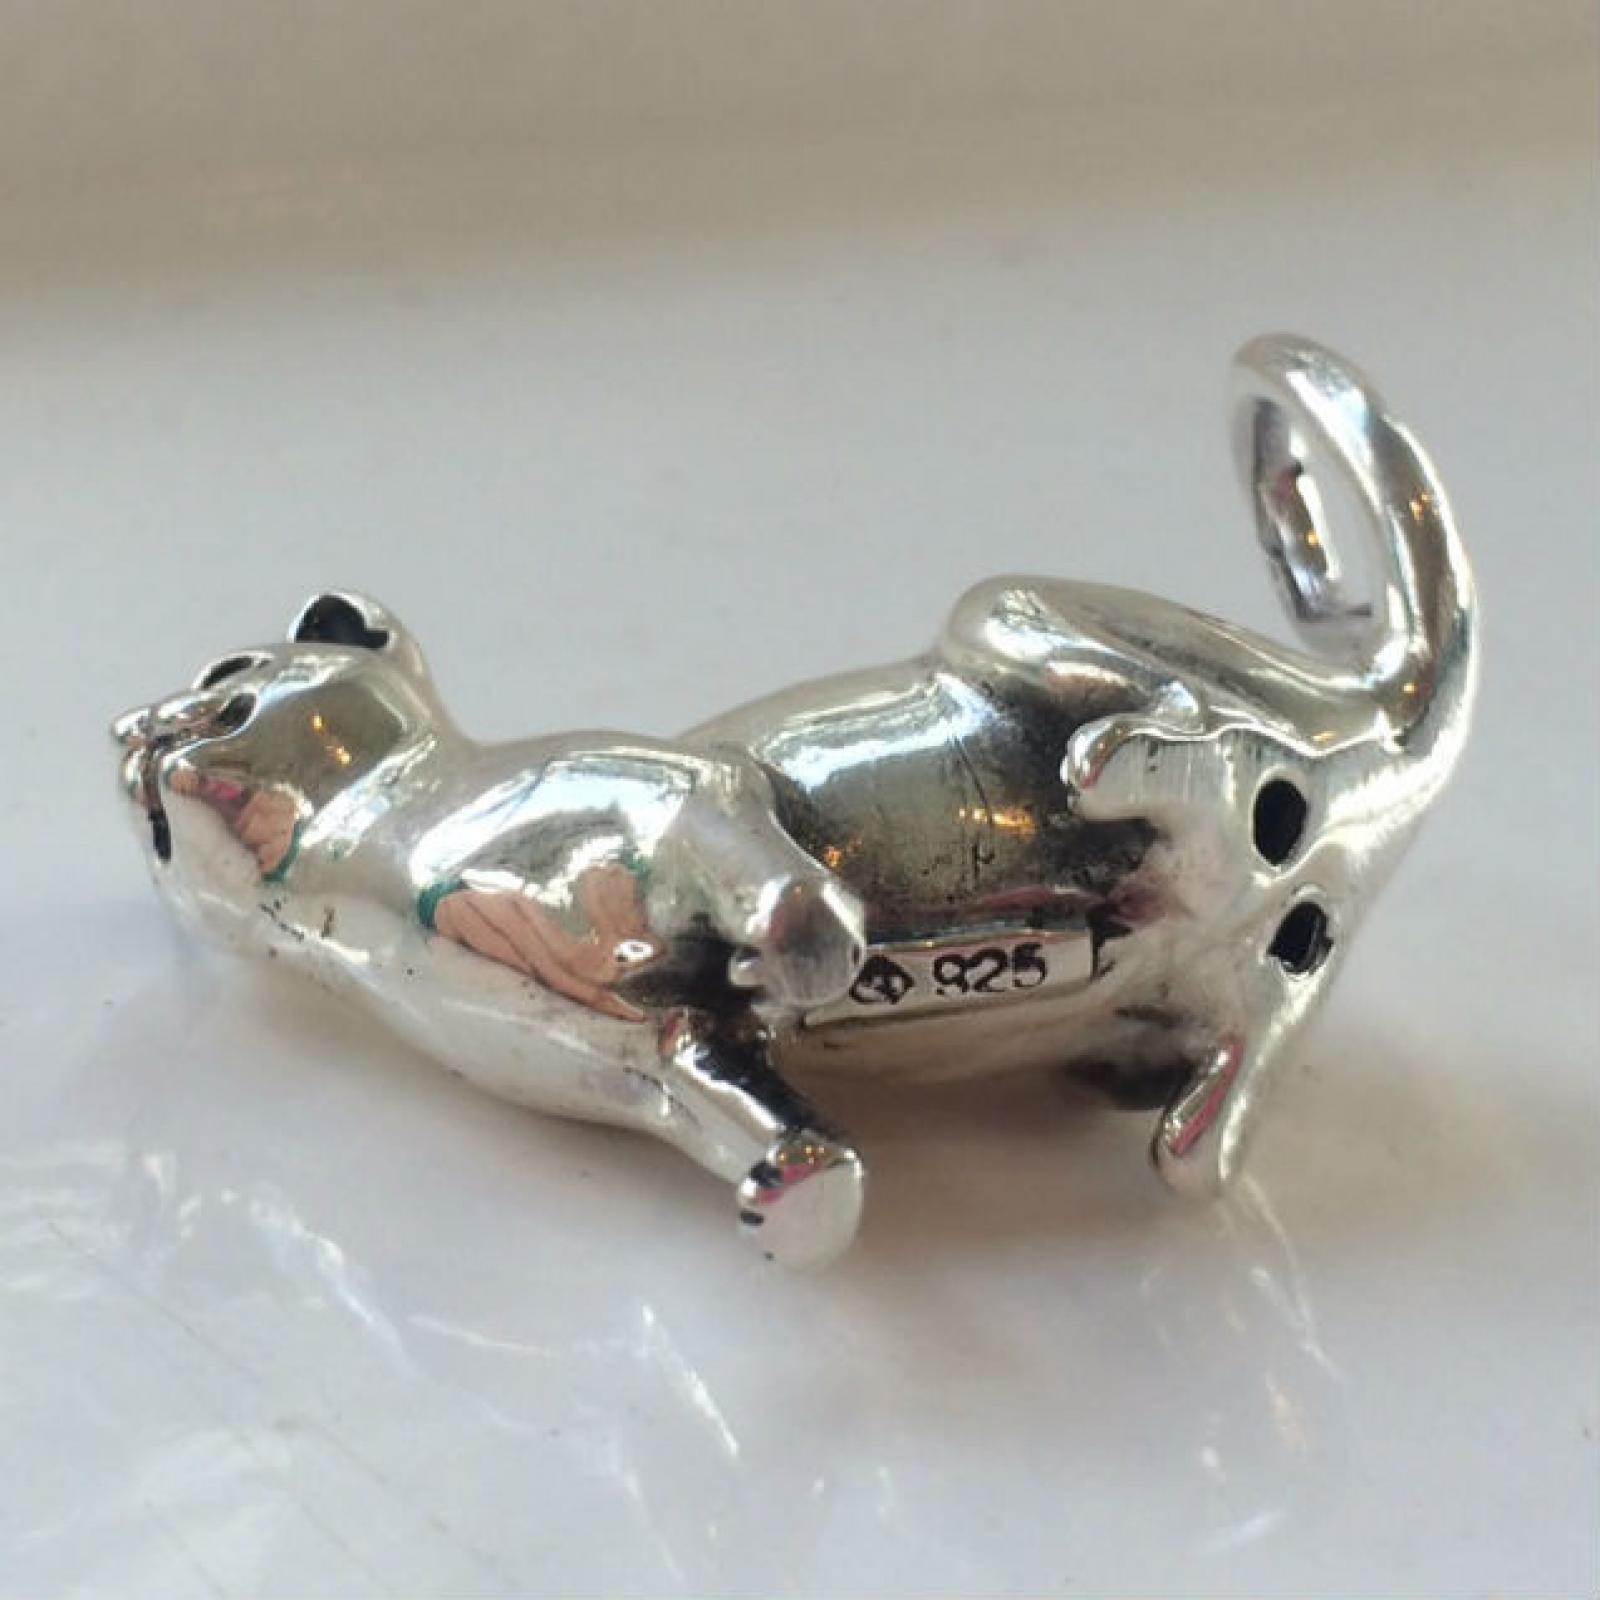 0.87 in x 0.75 in Jewel Tie Sterling Silver Antiqued Cat Charm